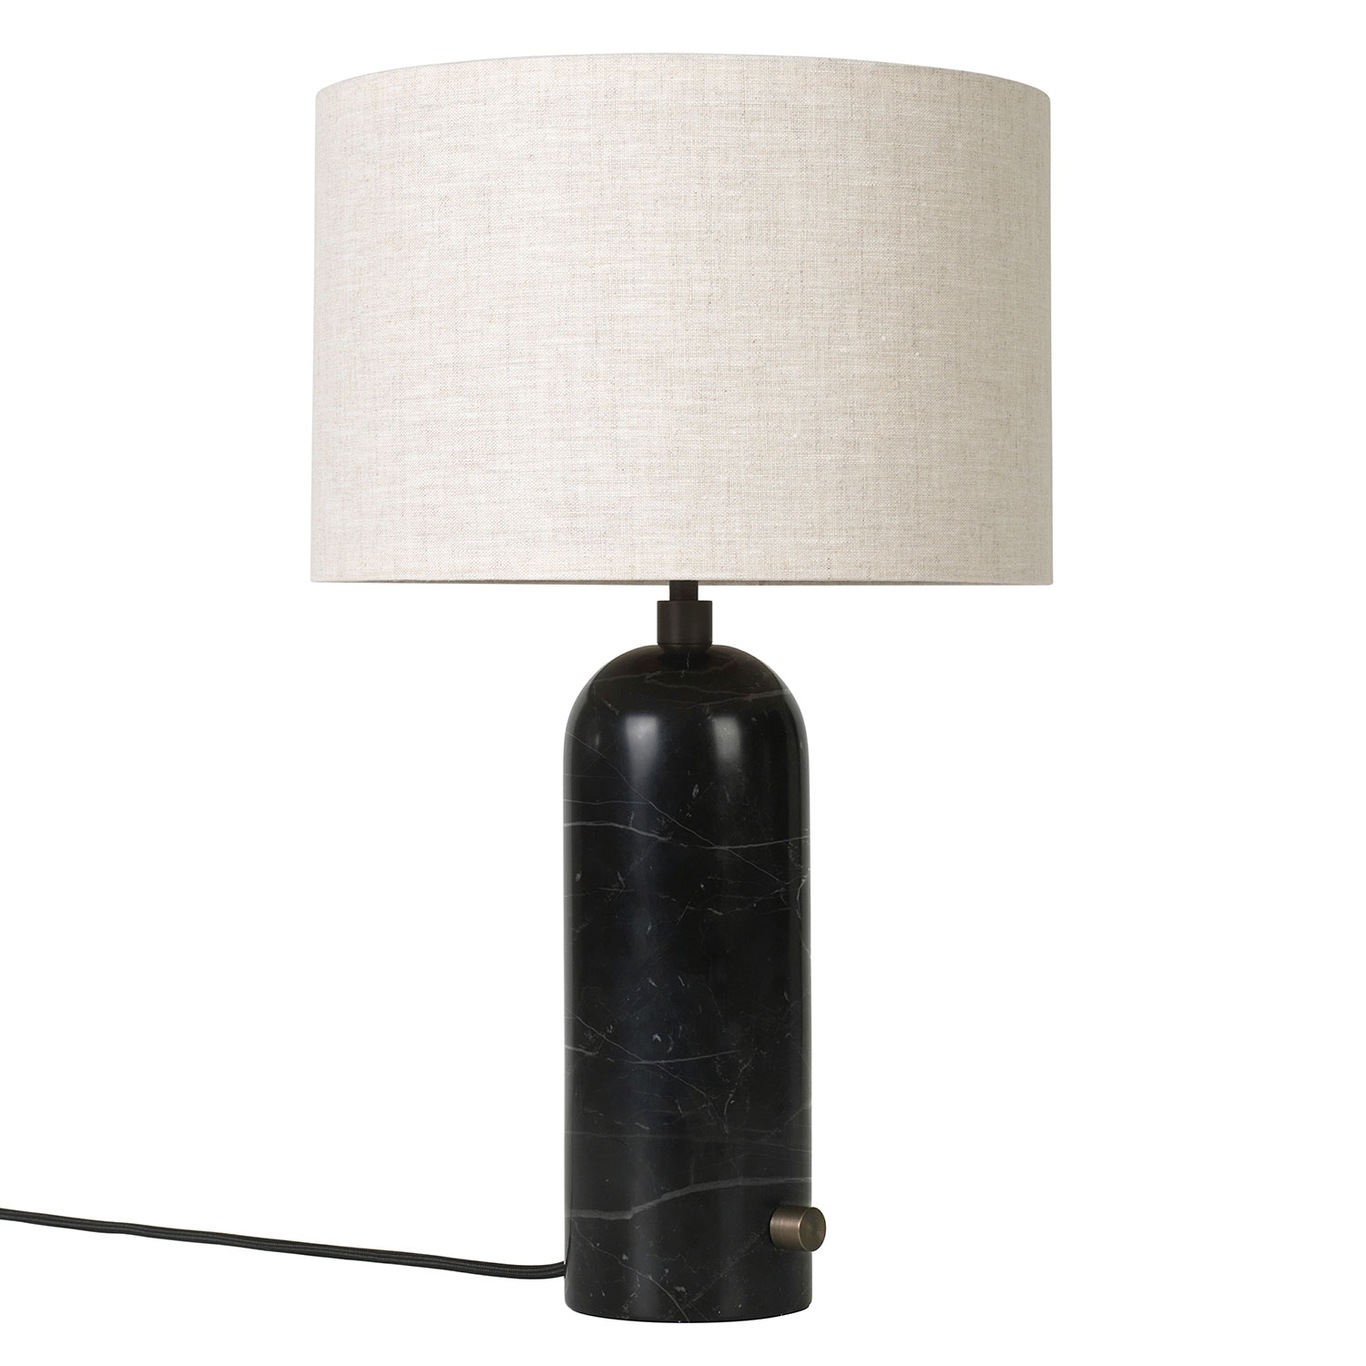 Gravity Table Lamp Small, Black Marble / Canvas